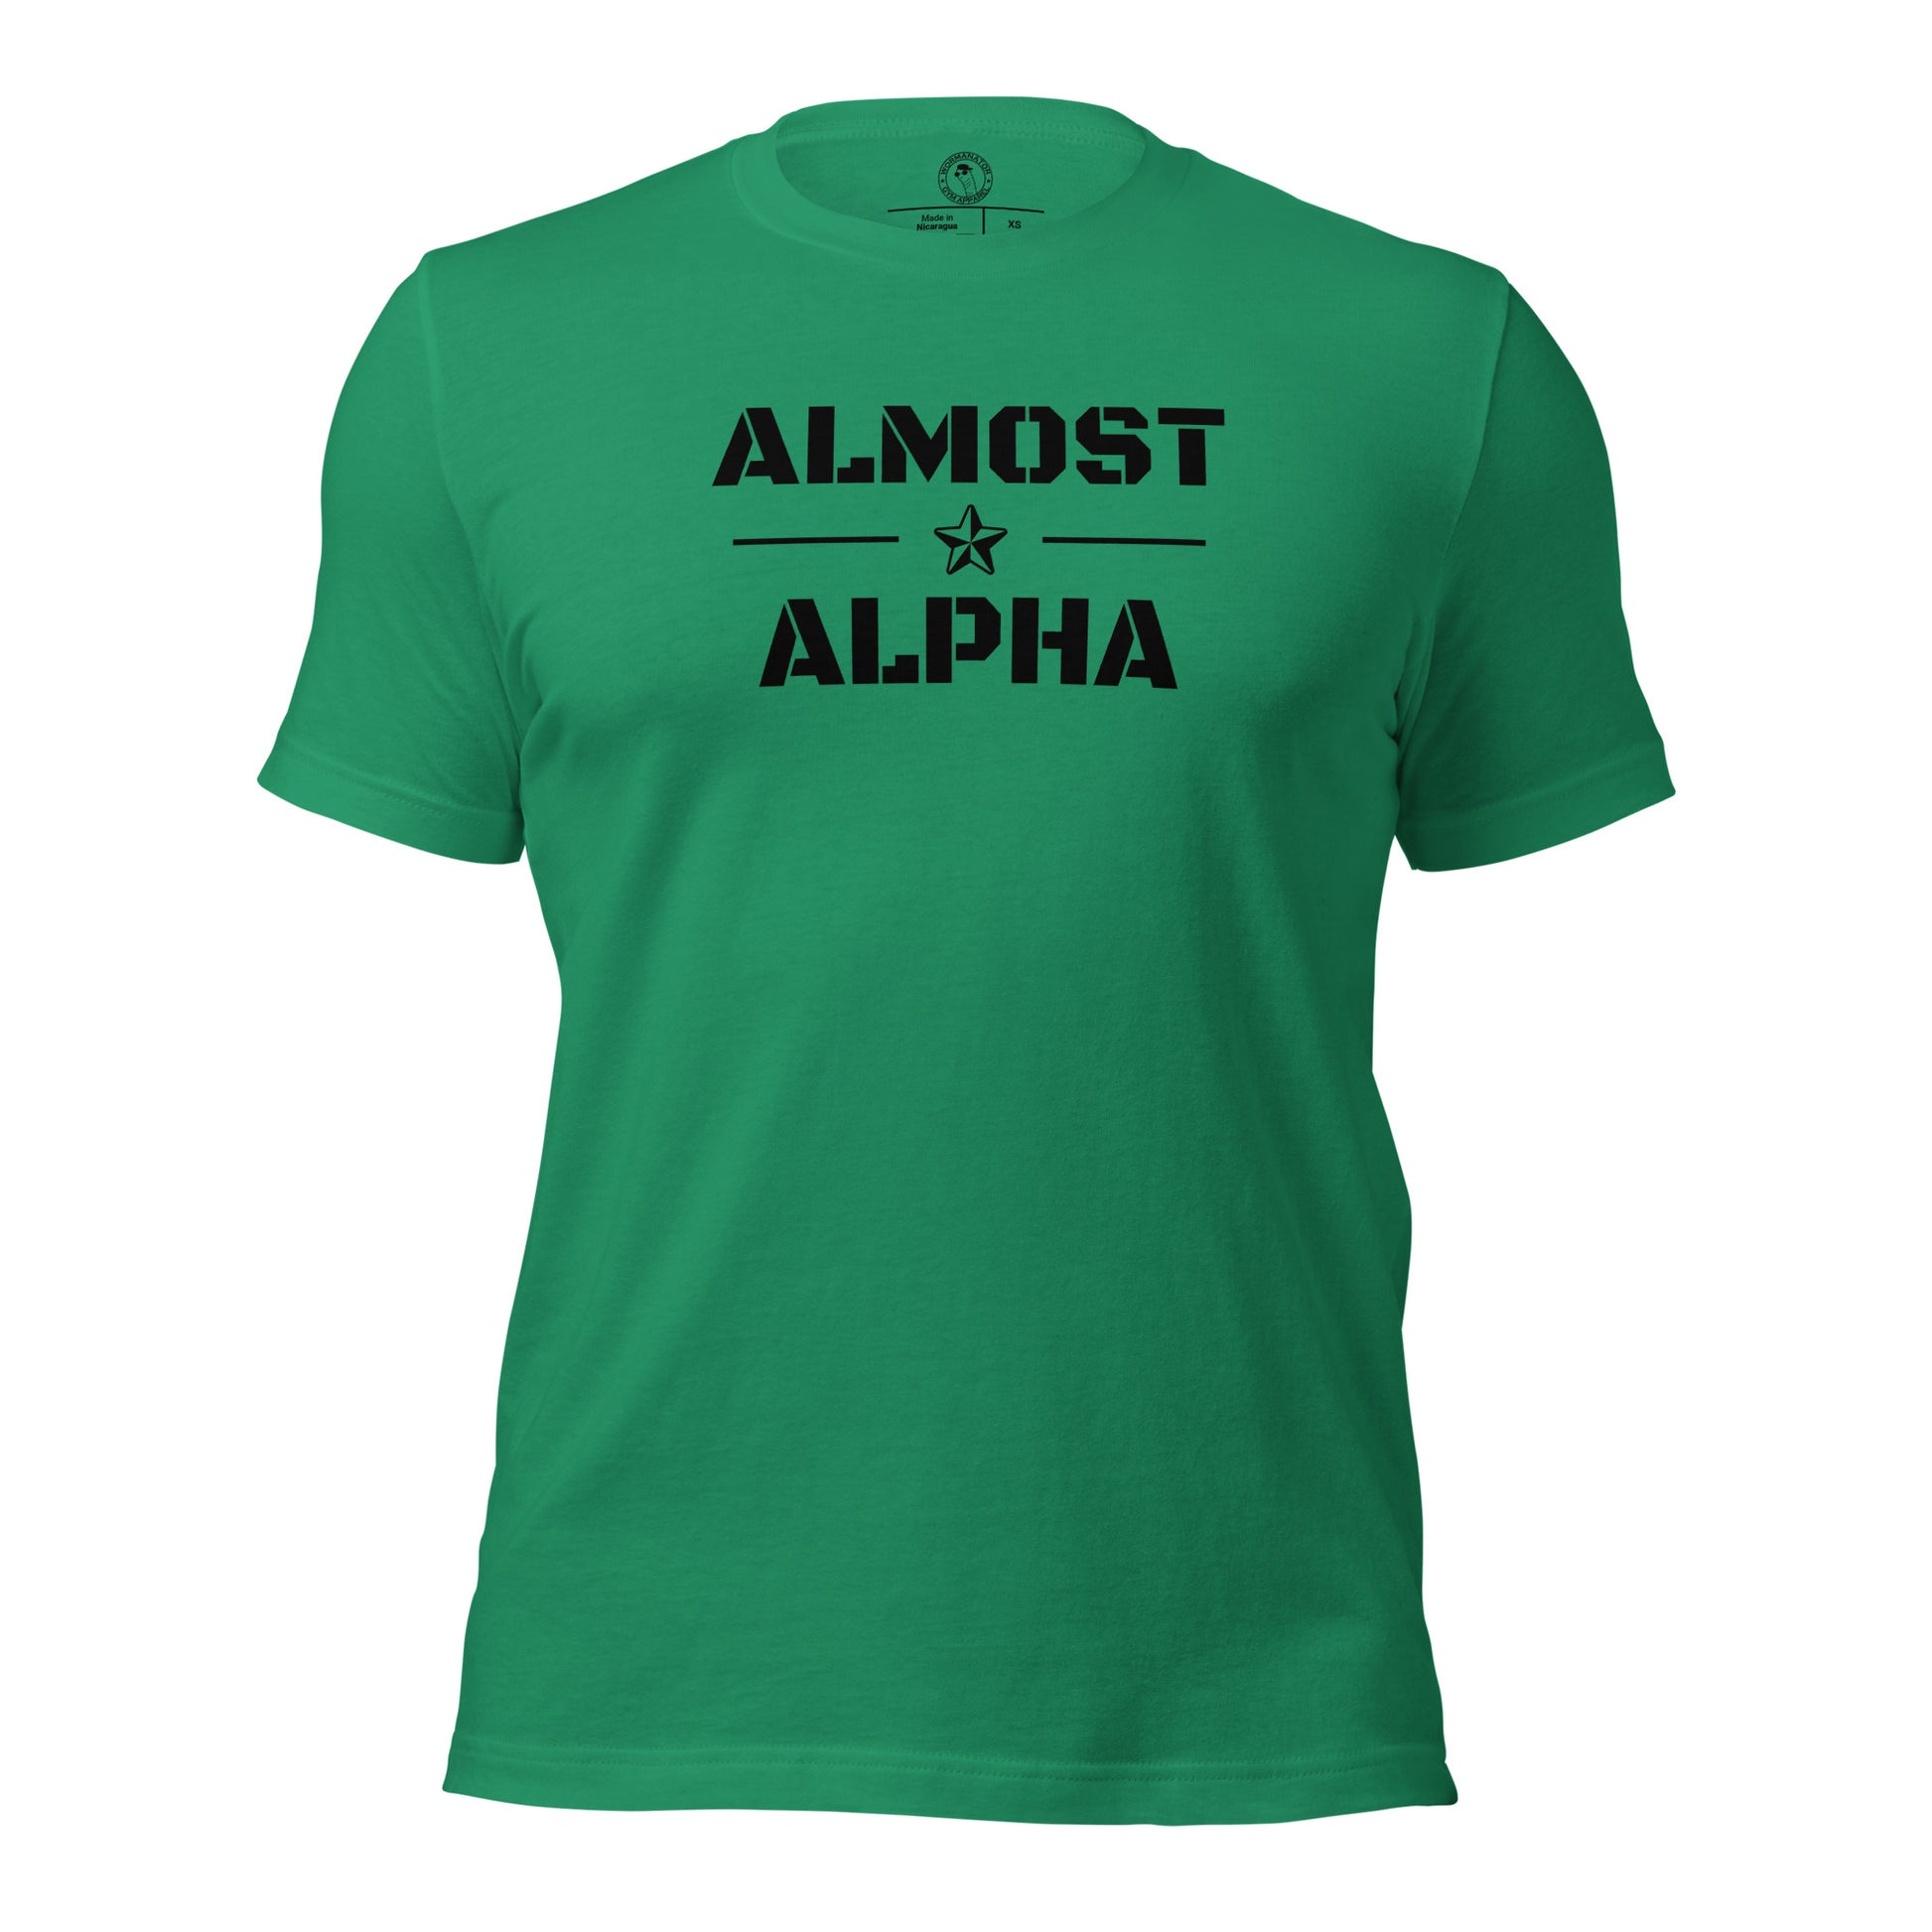 Almost Alpha Shirt in Kelly Green